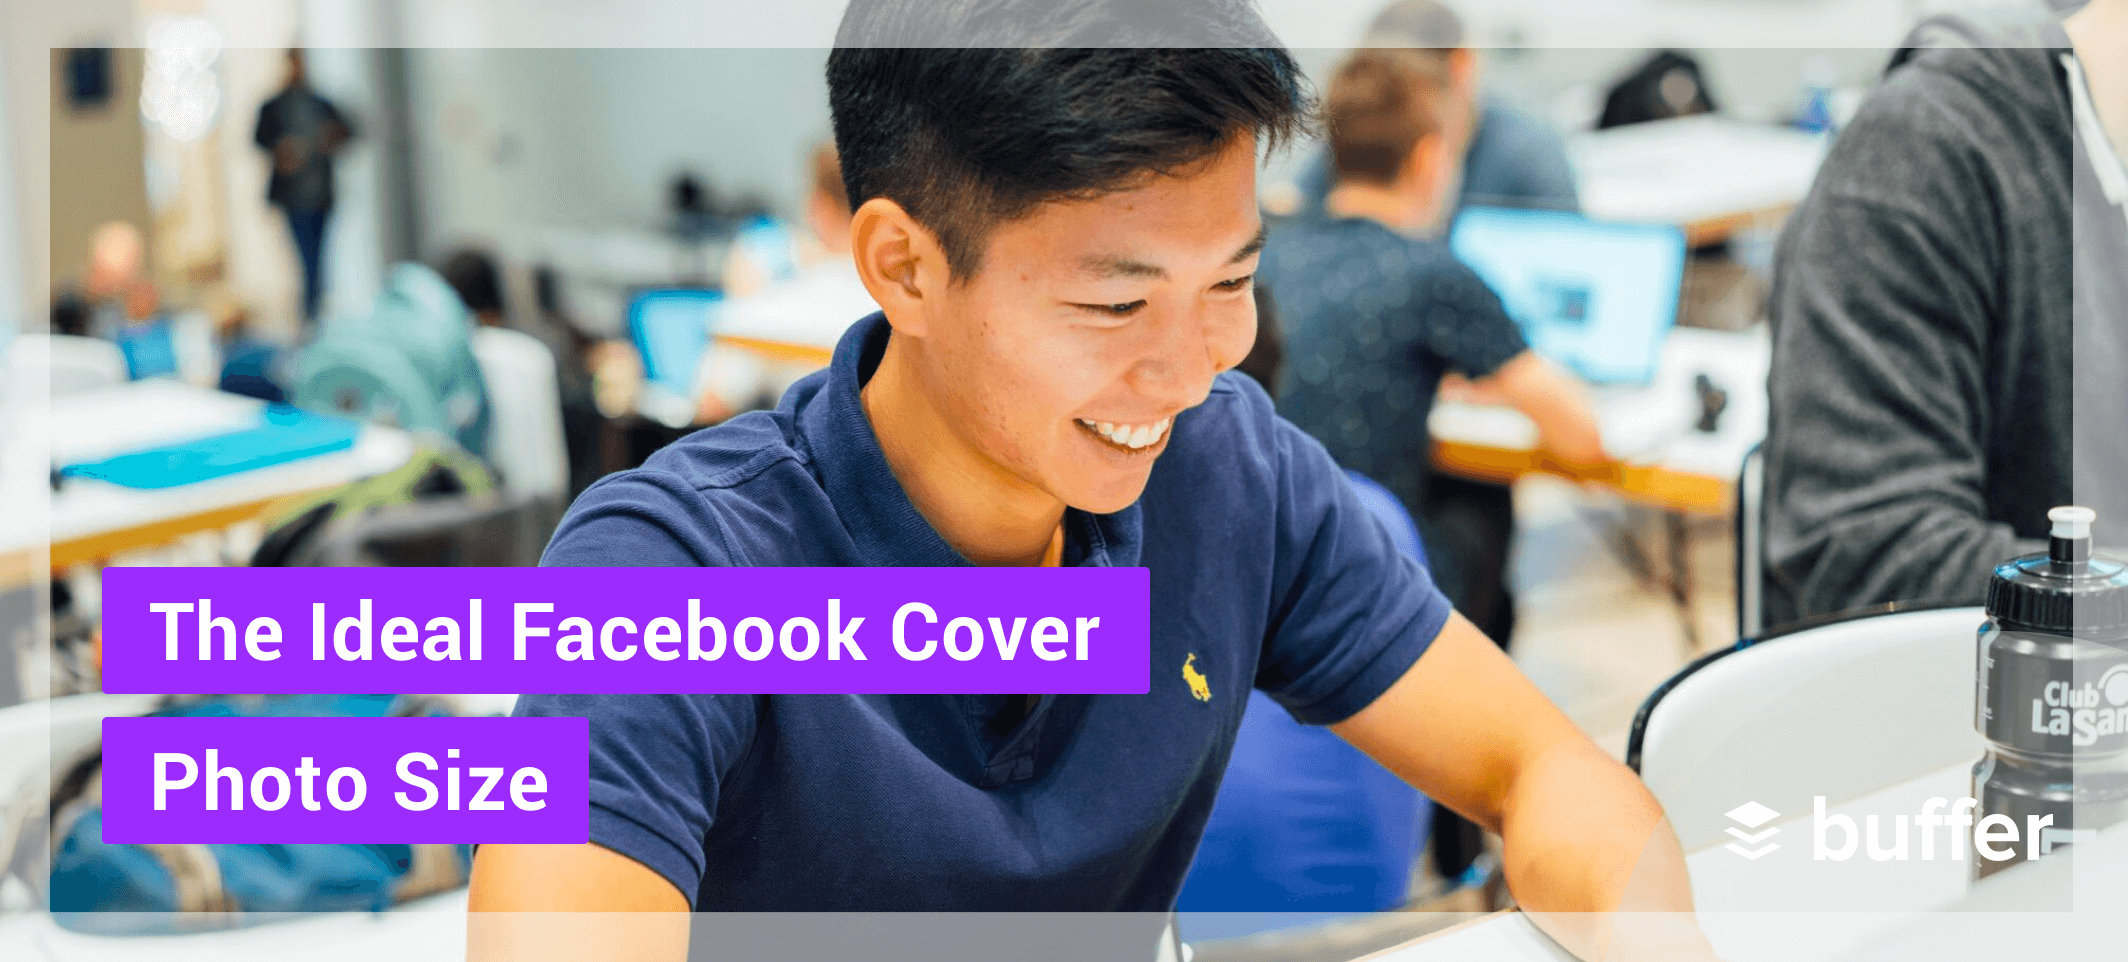 The Ideal Facebook Cover Photo Size And How To Make Yours Stand Out (Including 11 Ideas and Examples)